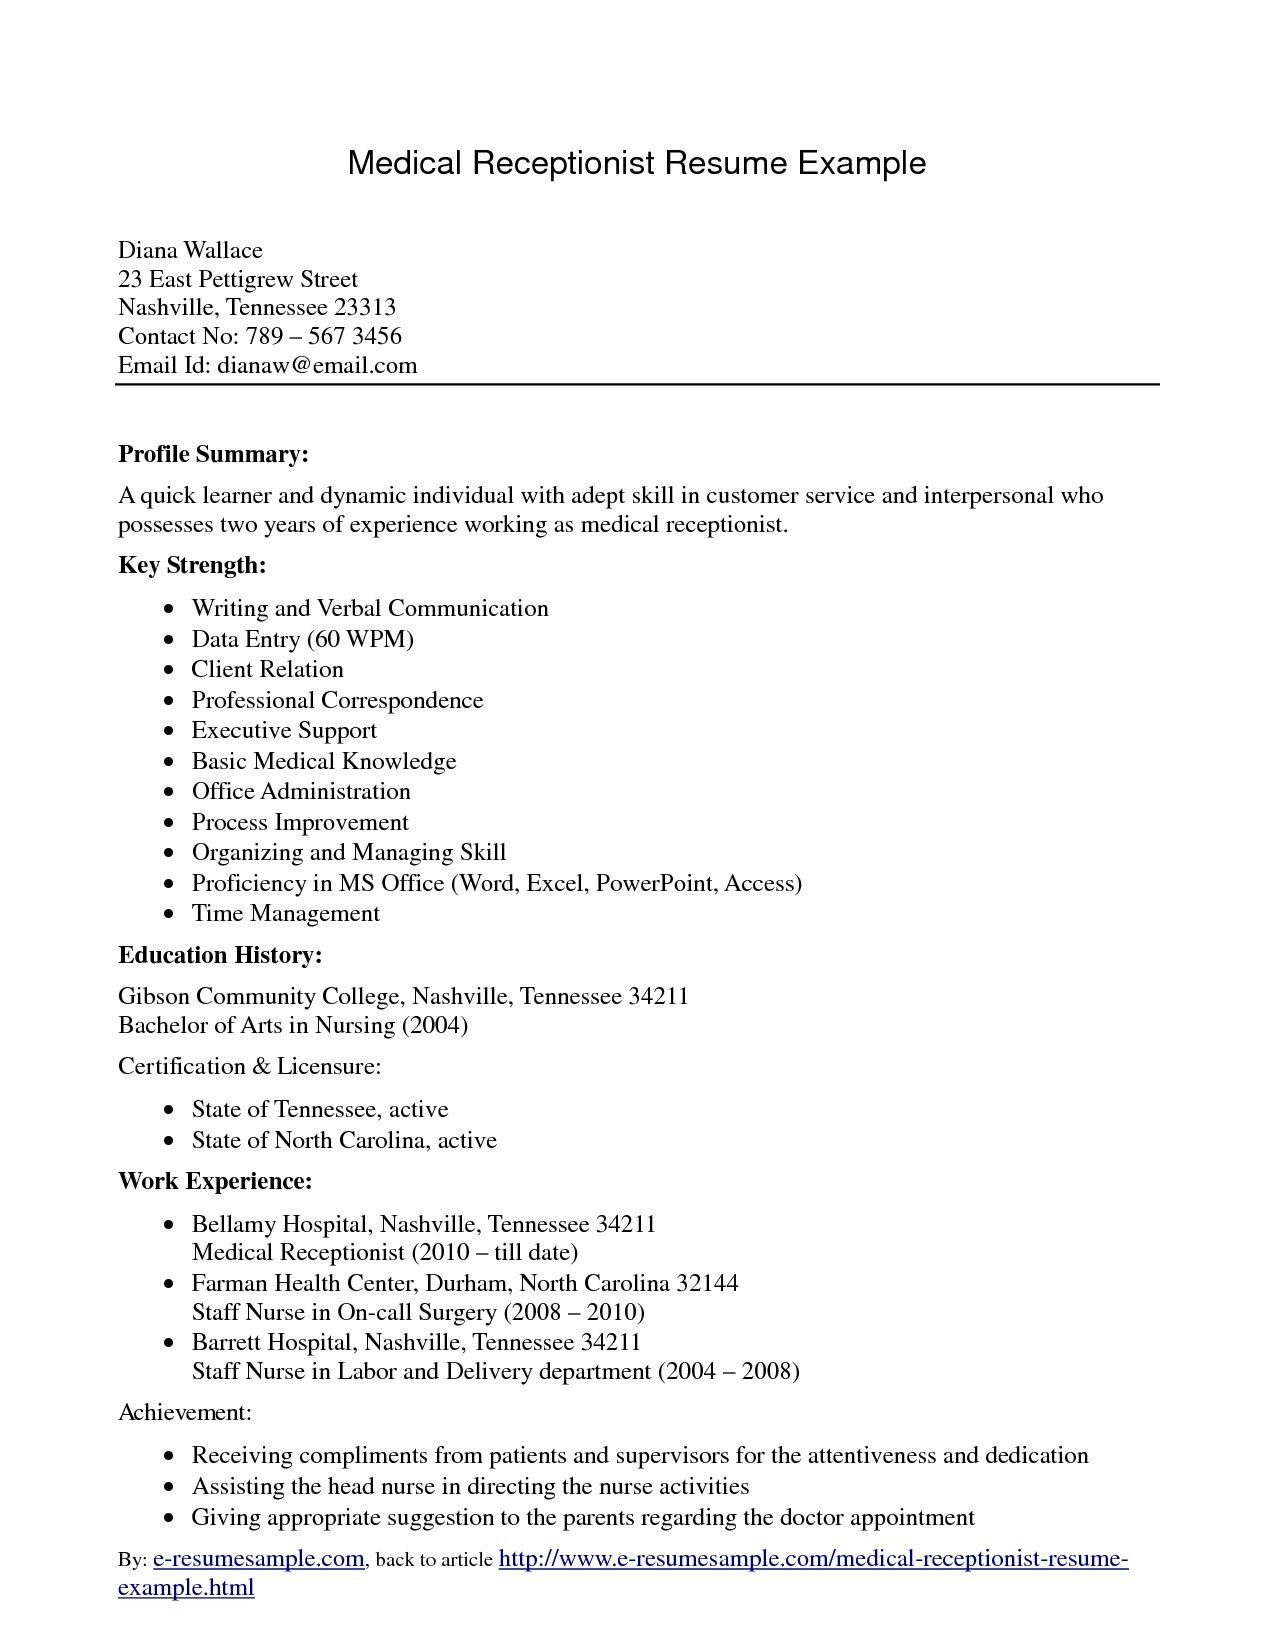 Resume Sample for Receptionist Position with No Experience Receptionist Cover Letter No Experience Cover Letter for Resume …